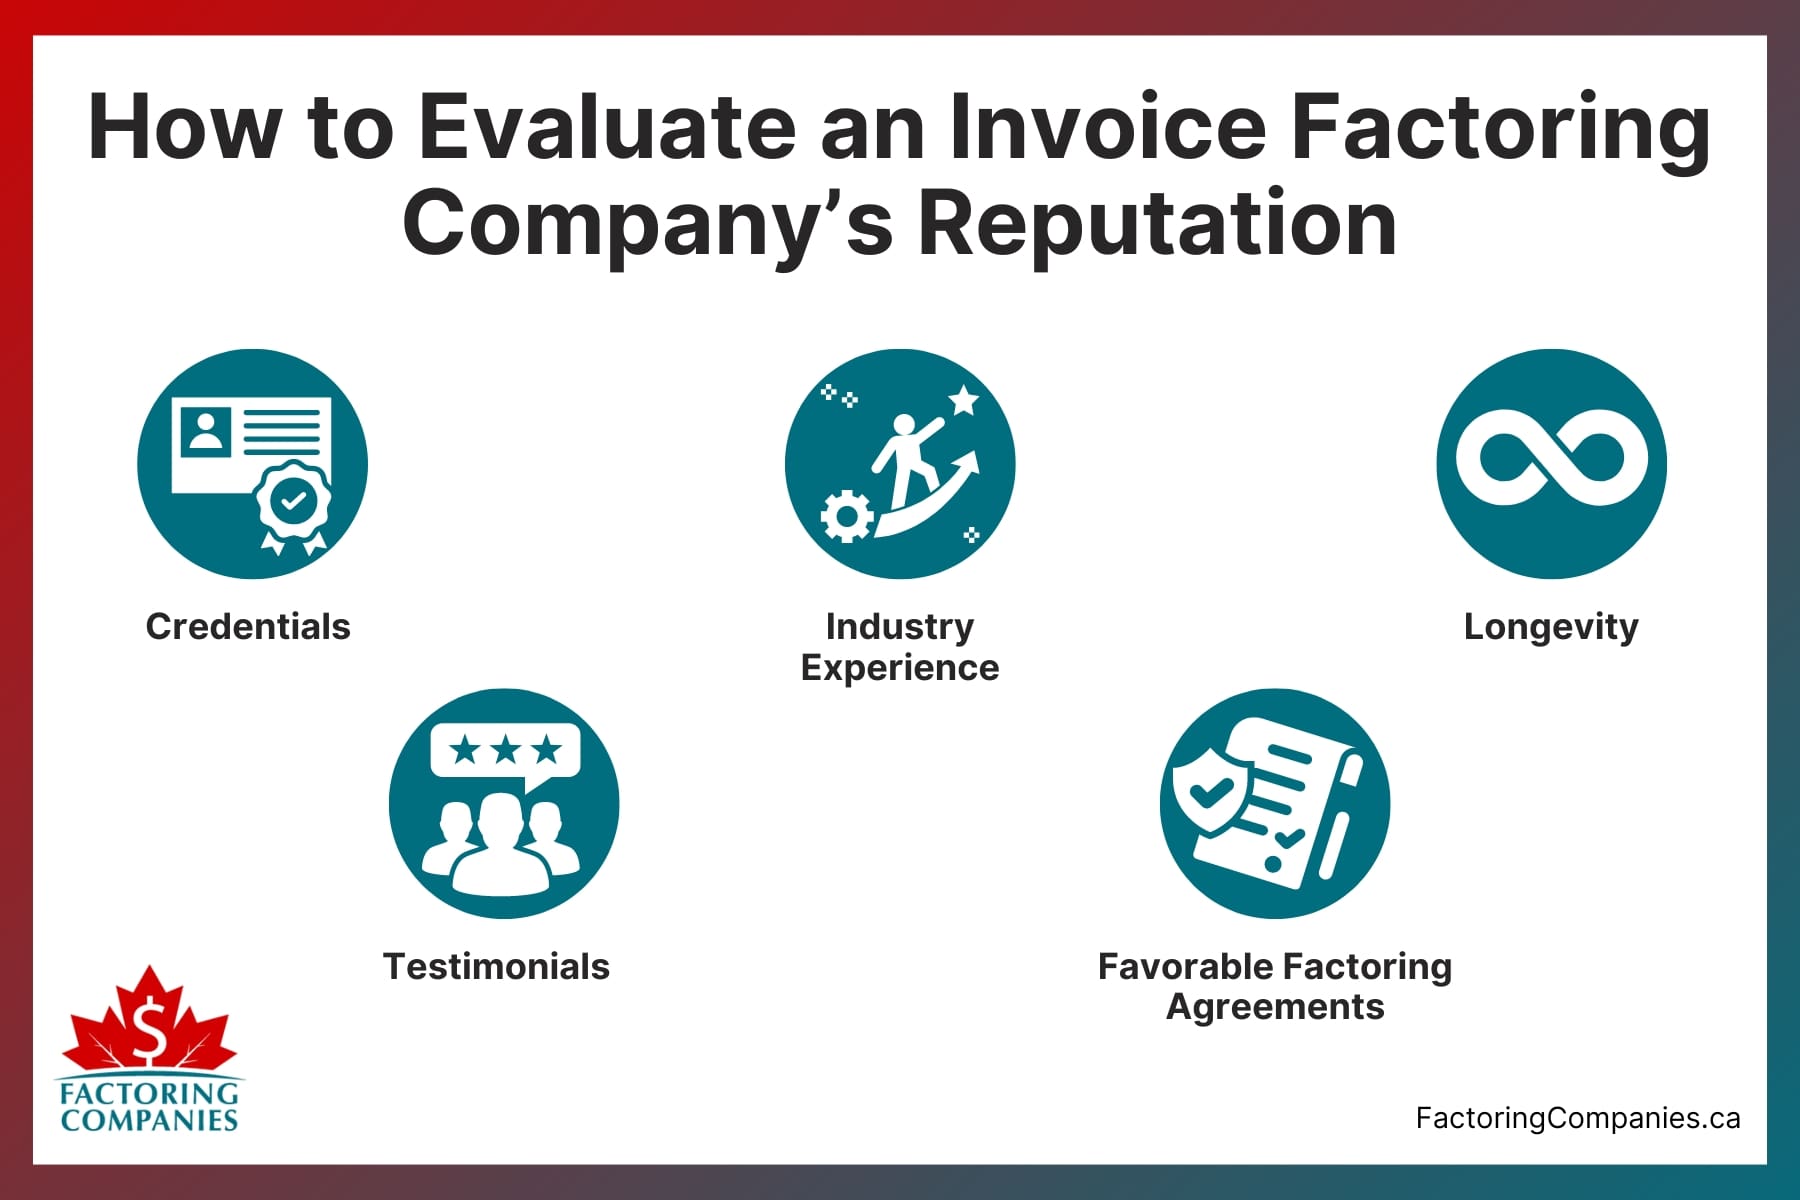 Evaluating an Invoice Factoring Company’s Reputation